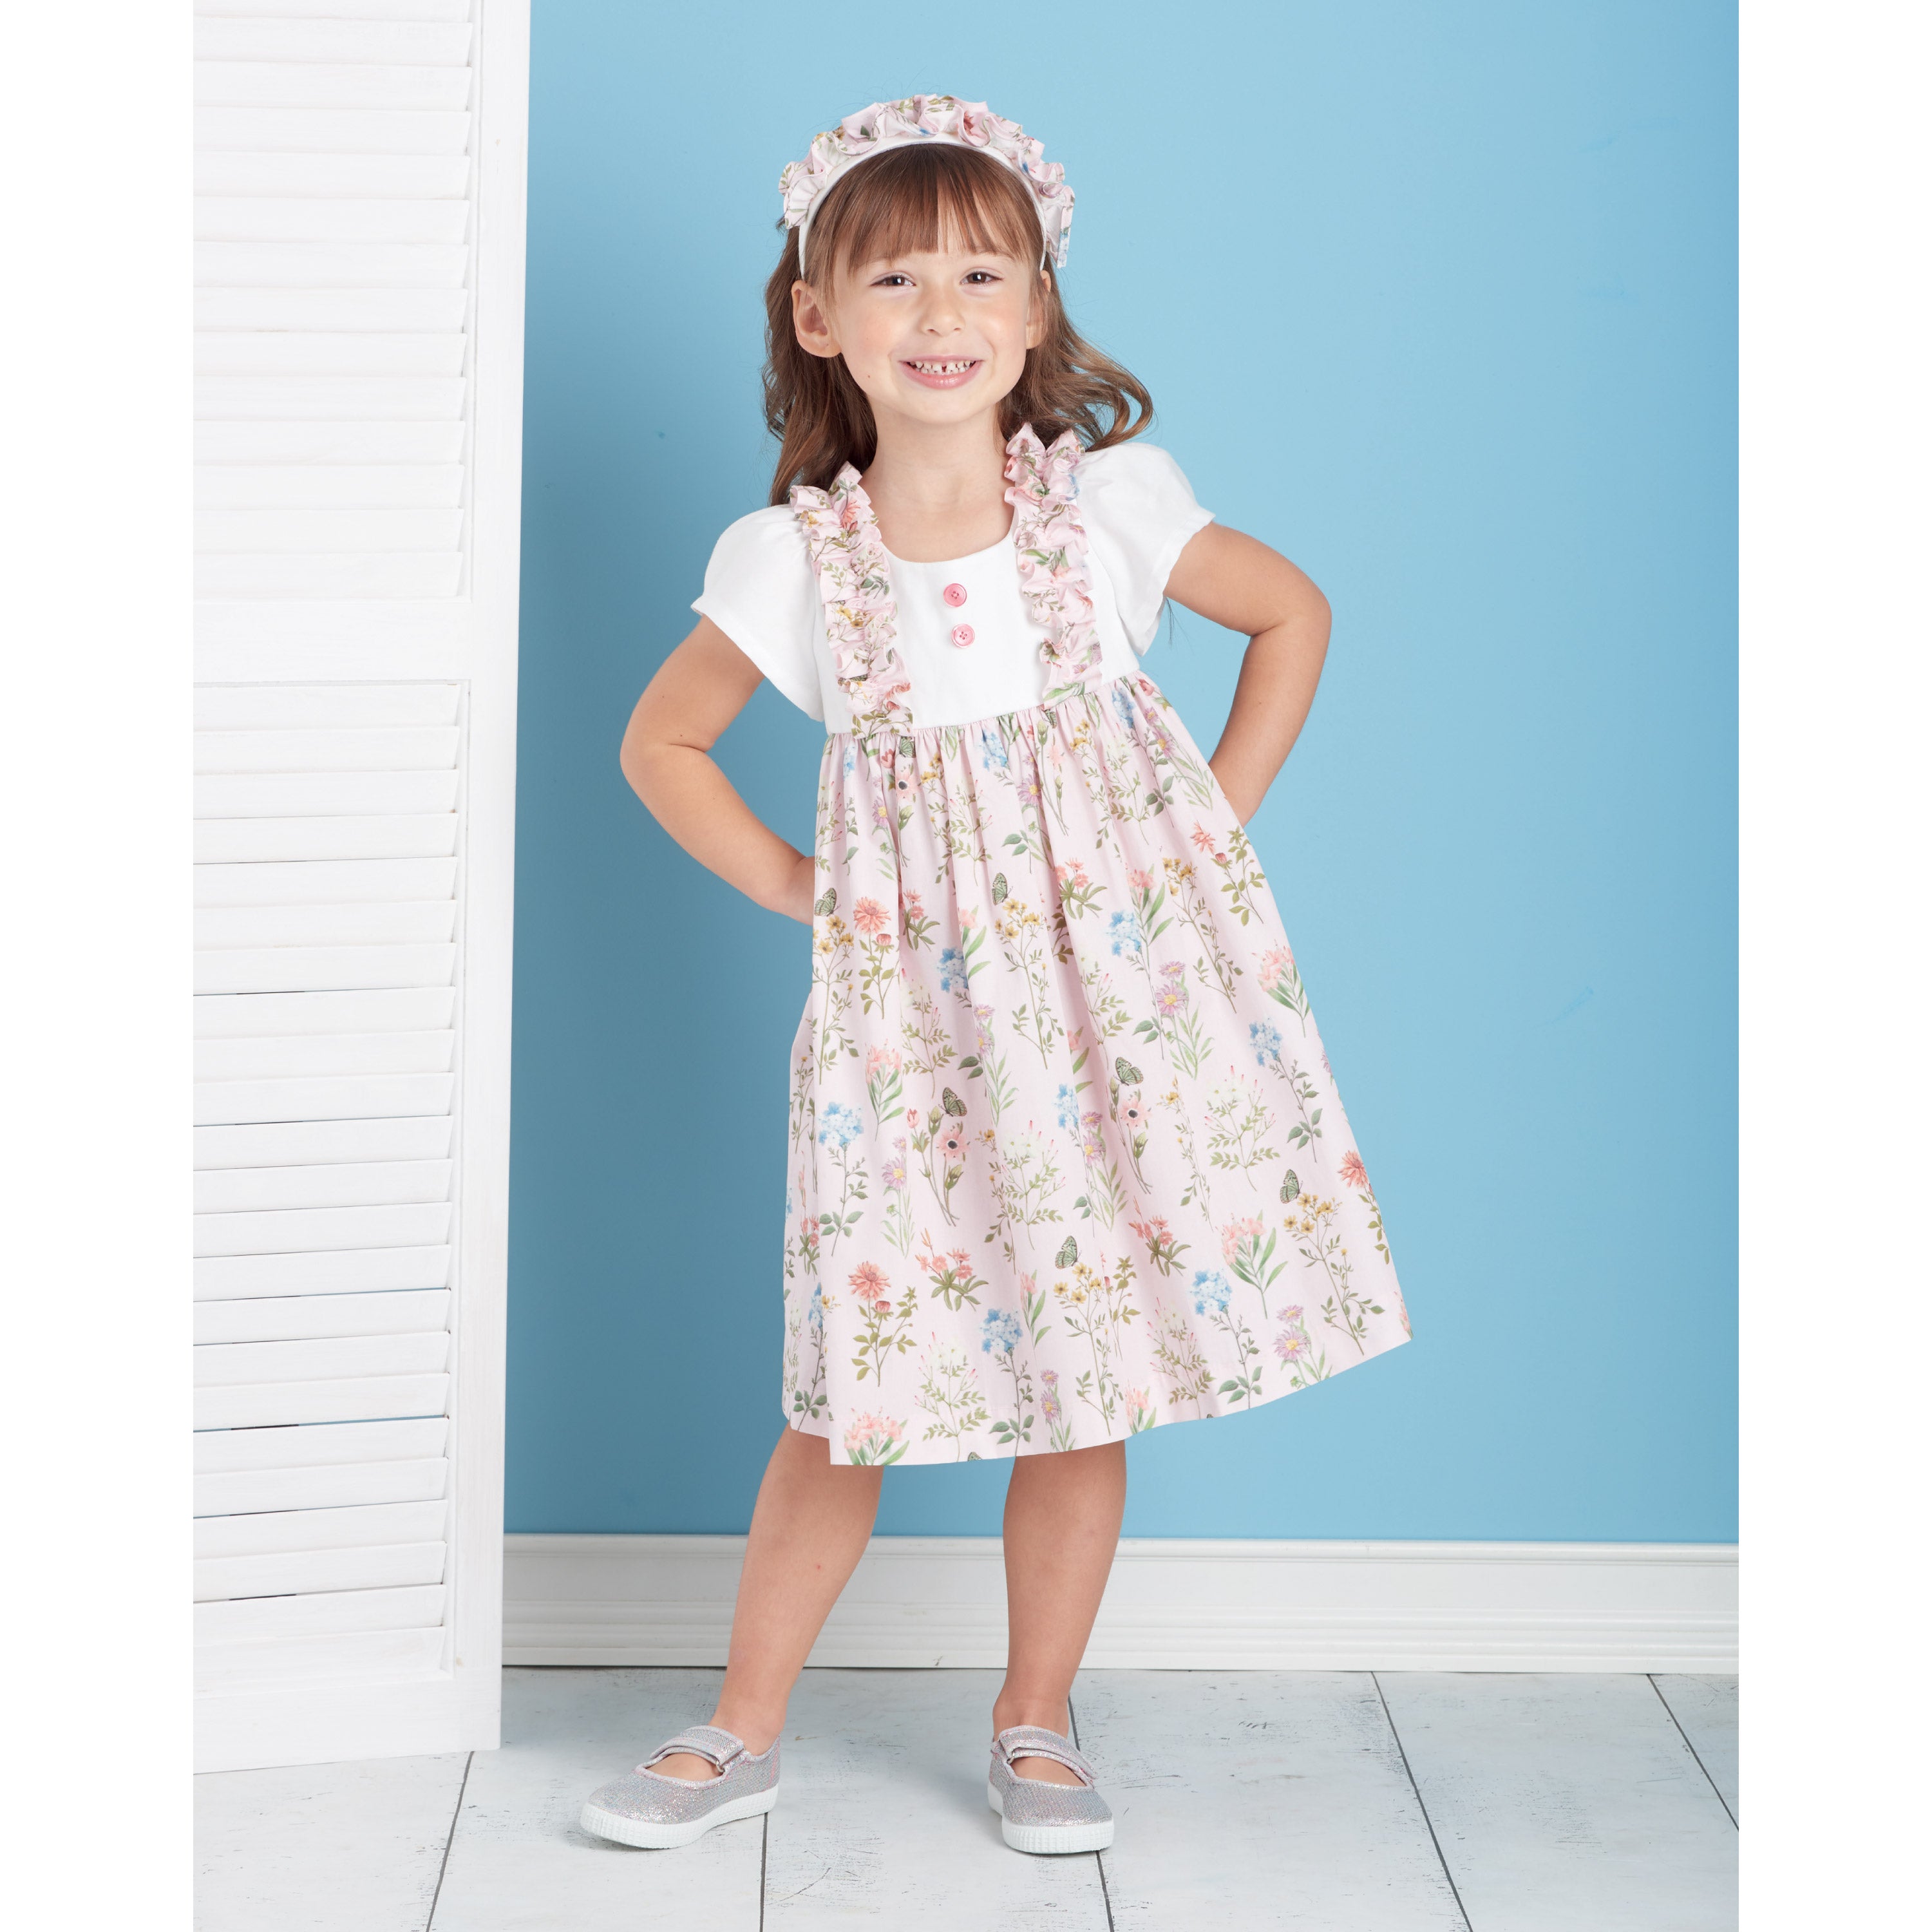 Simplicity 9559 Children's Dress, Top and bags pattern from Jaycotts Sewing Supplies